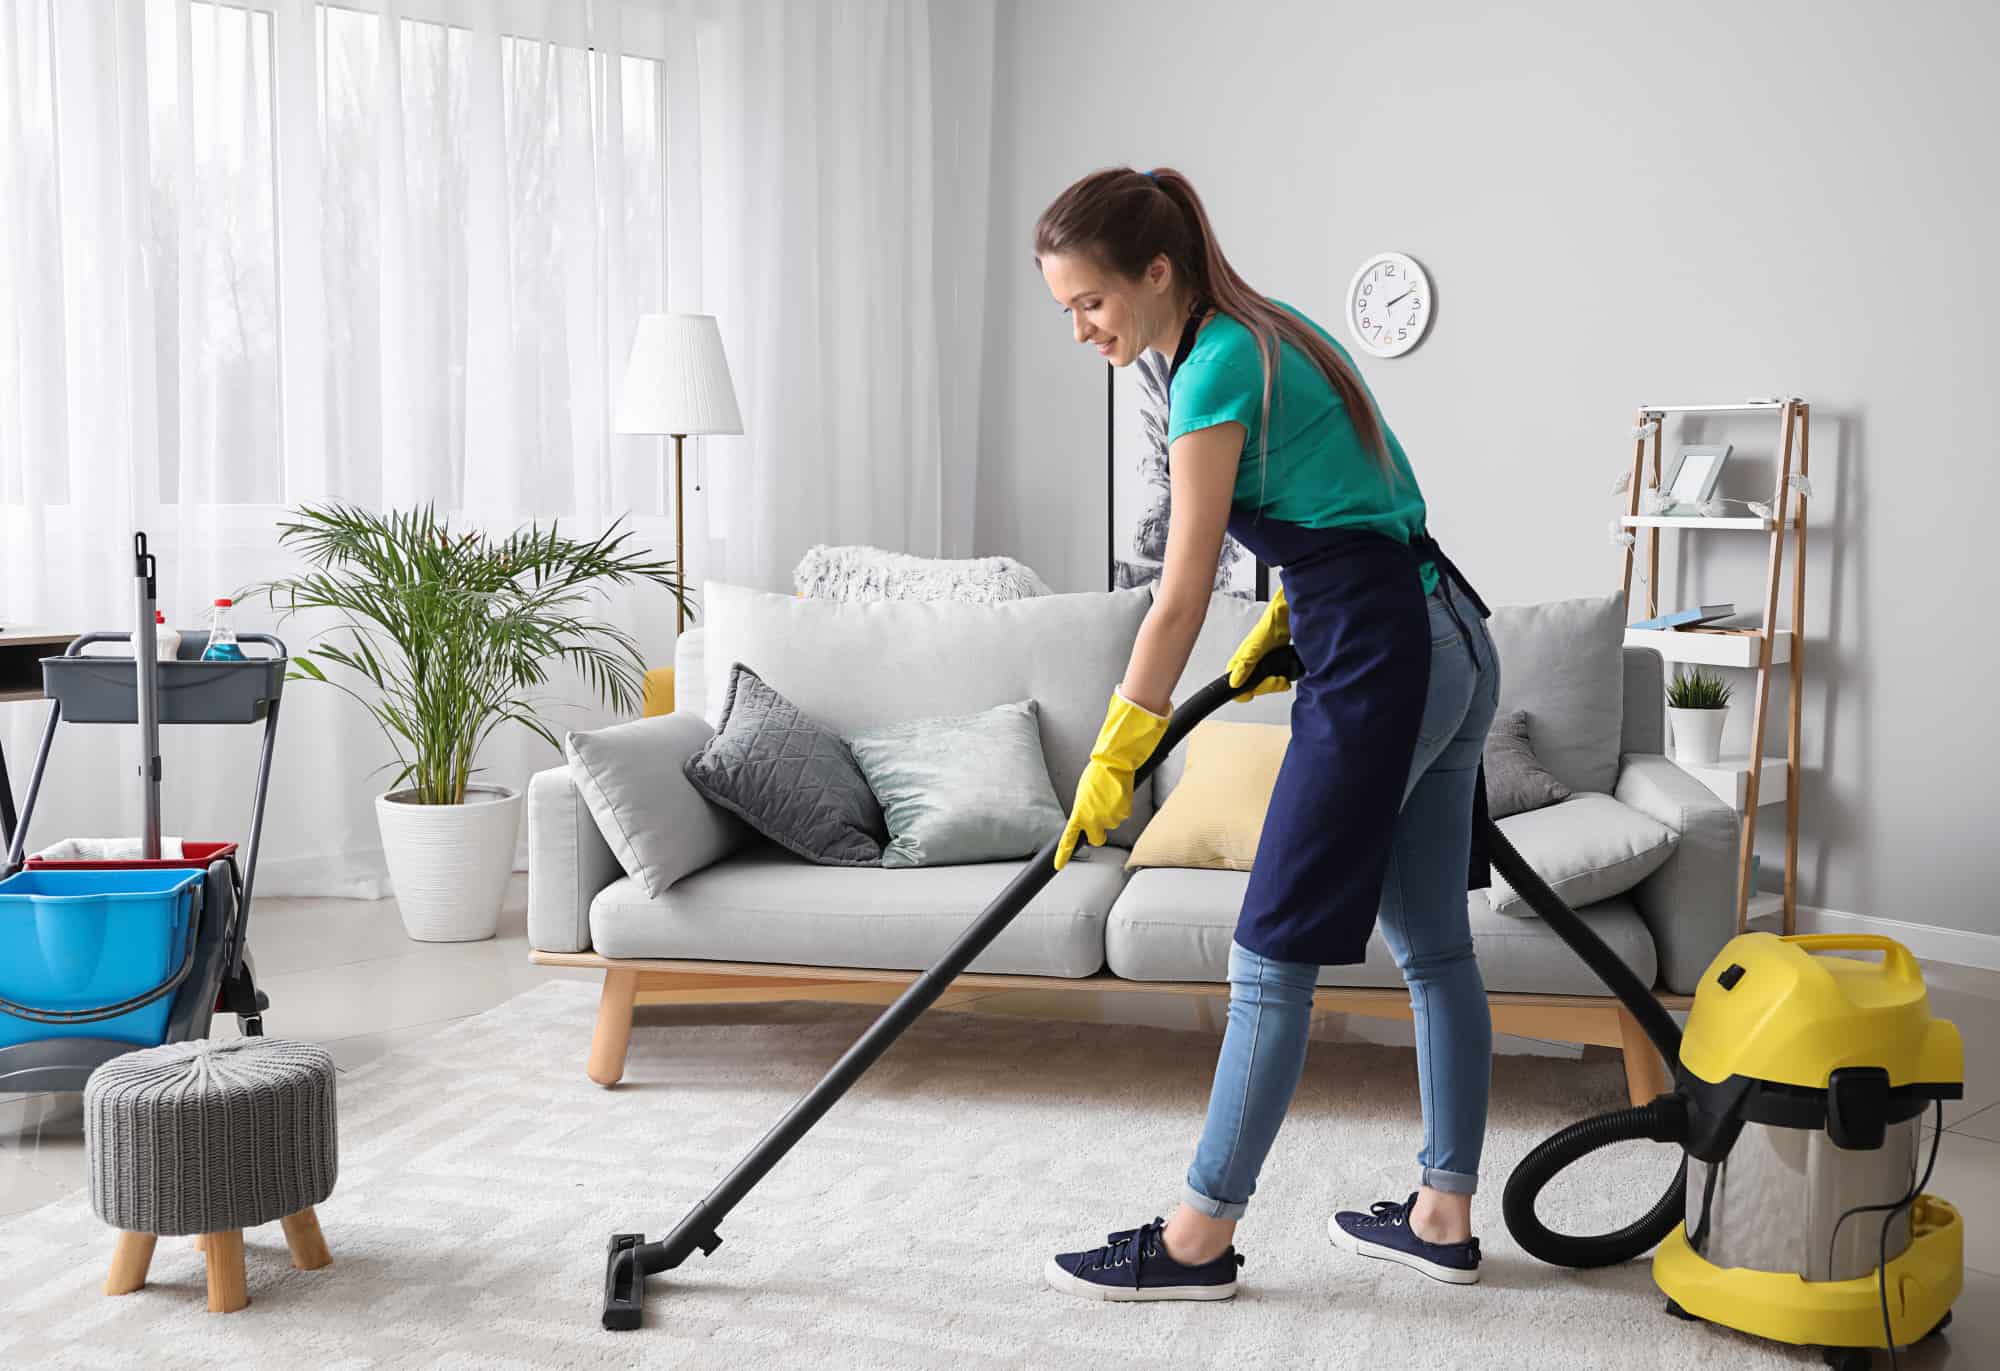 Young woman vacuuming in the living room.